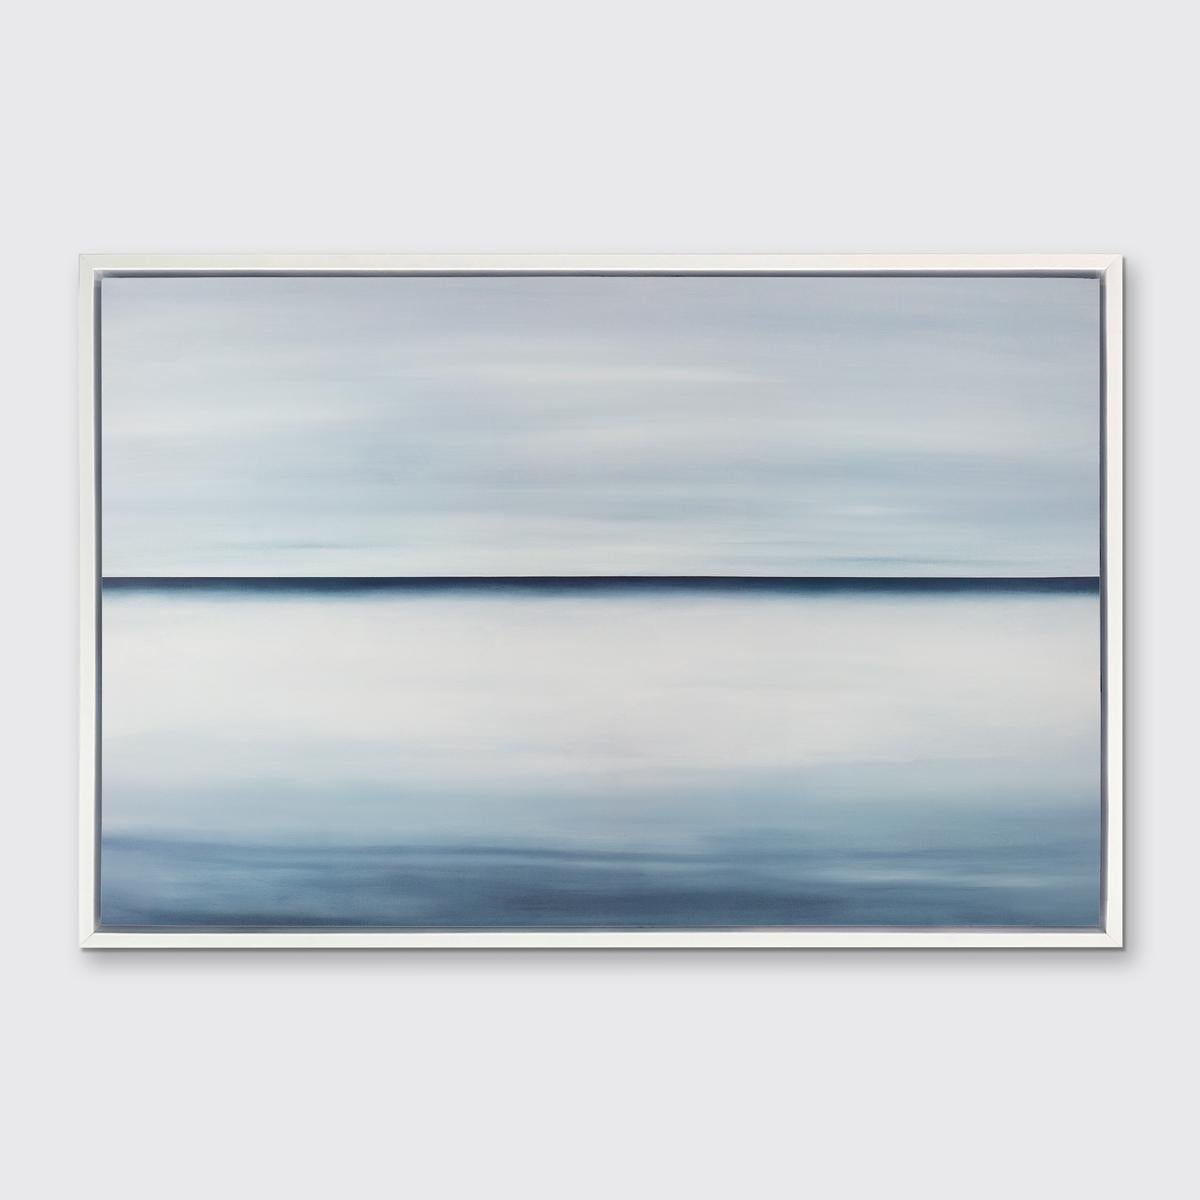 Tony Iadicicco Abstract Print - "Open Water" Framed Limited Edition Giclee Print, 36" x 54"